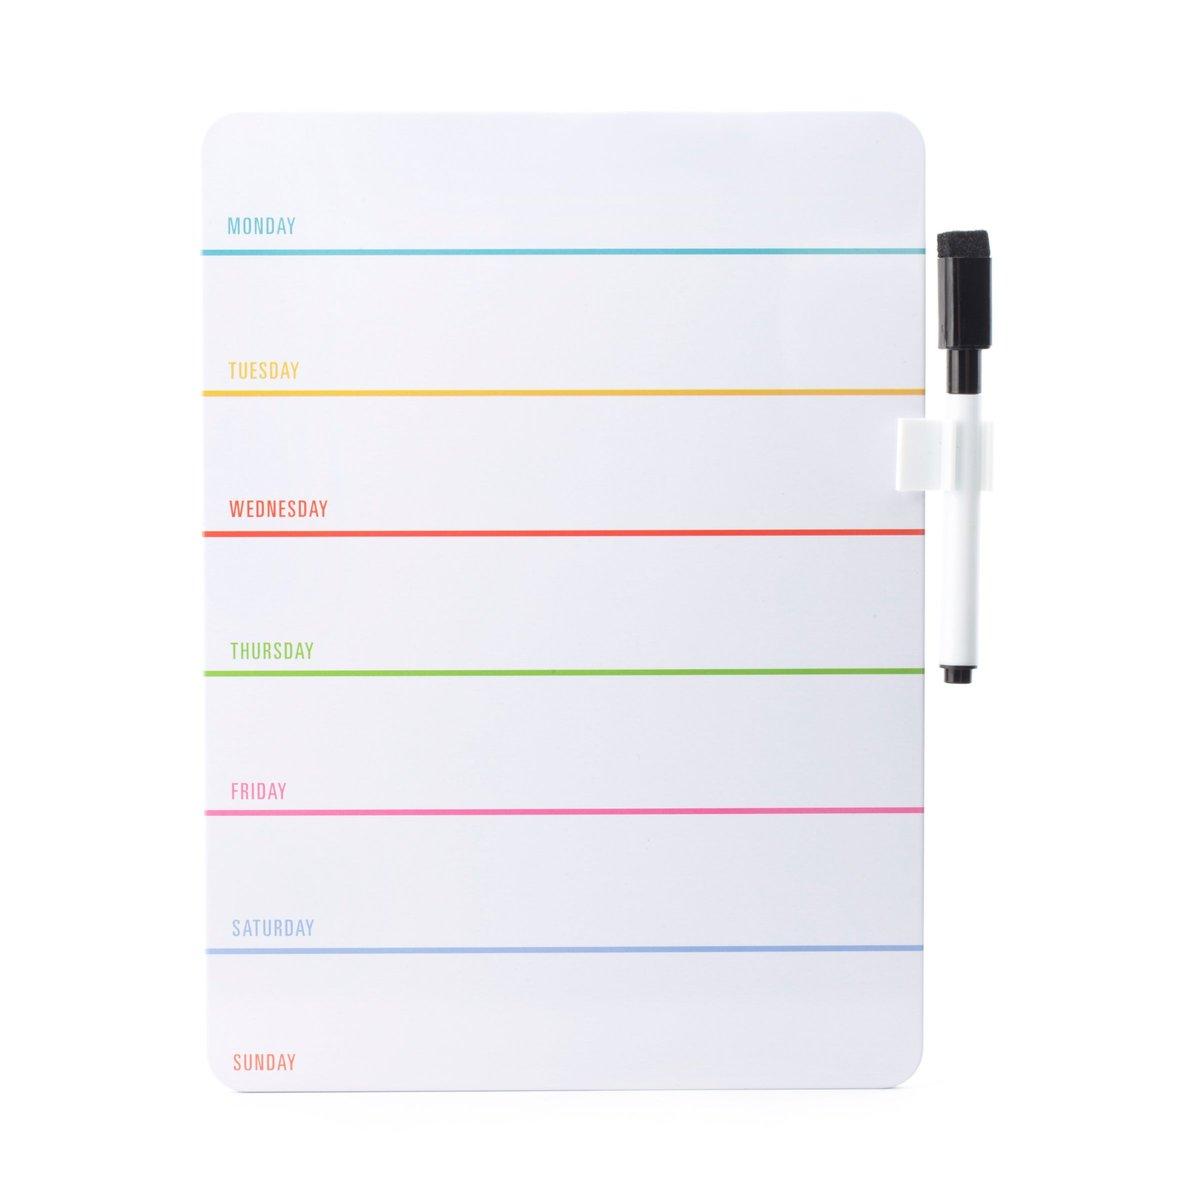 Kikkerland Magnetic Daily Dry Erase Board - Daily Board with Lines and Days, Organize Chores, Daily Tasks, Activities, etc. Easy Write and Erase, Includes Dry Erase Marker